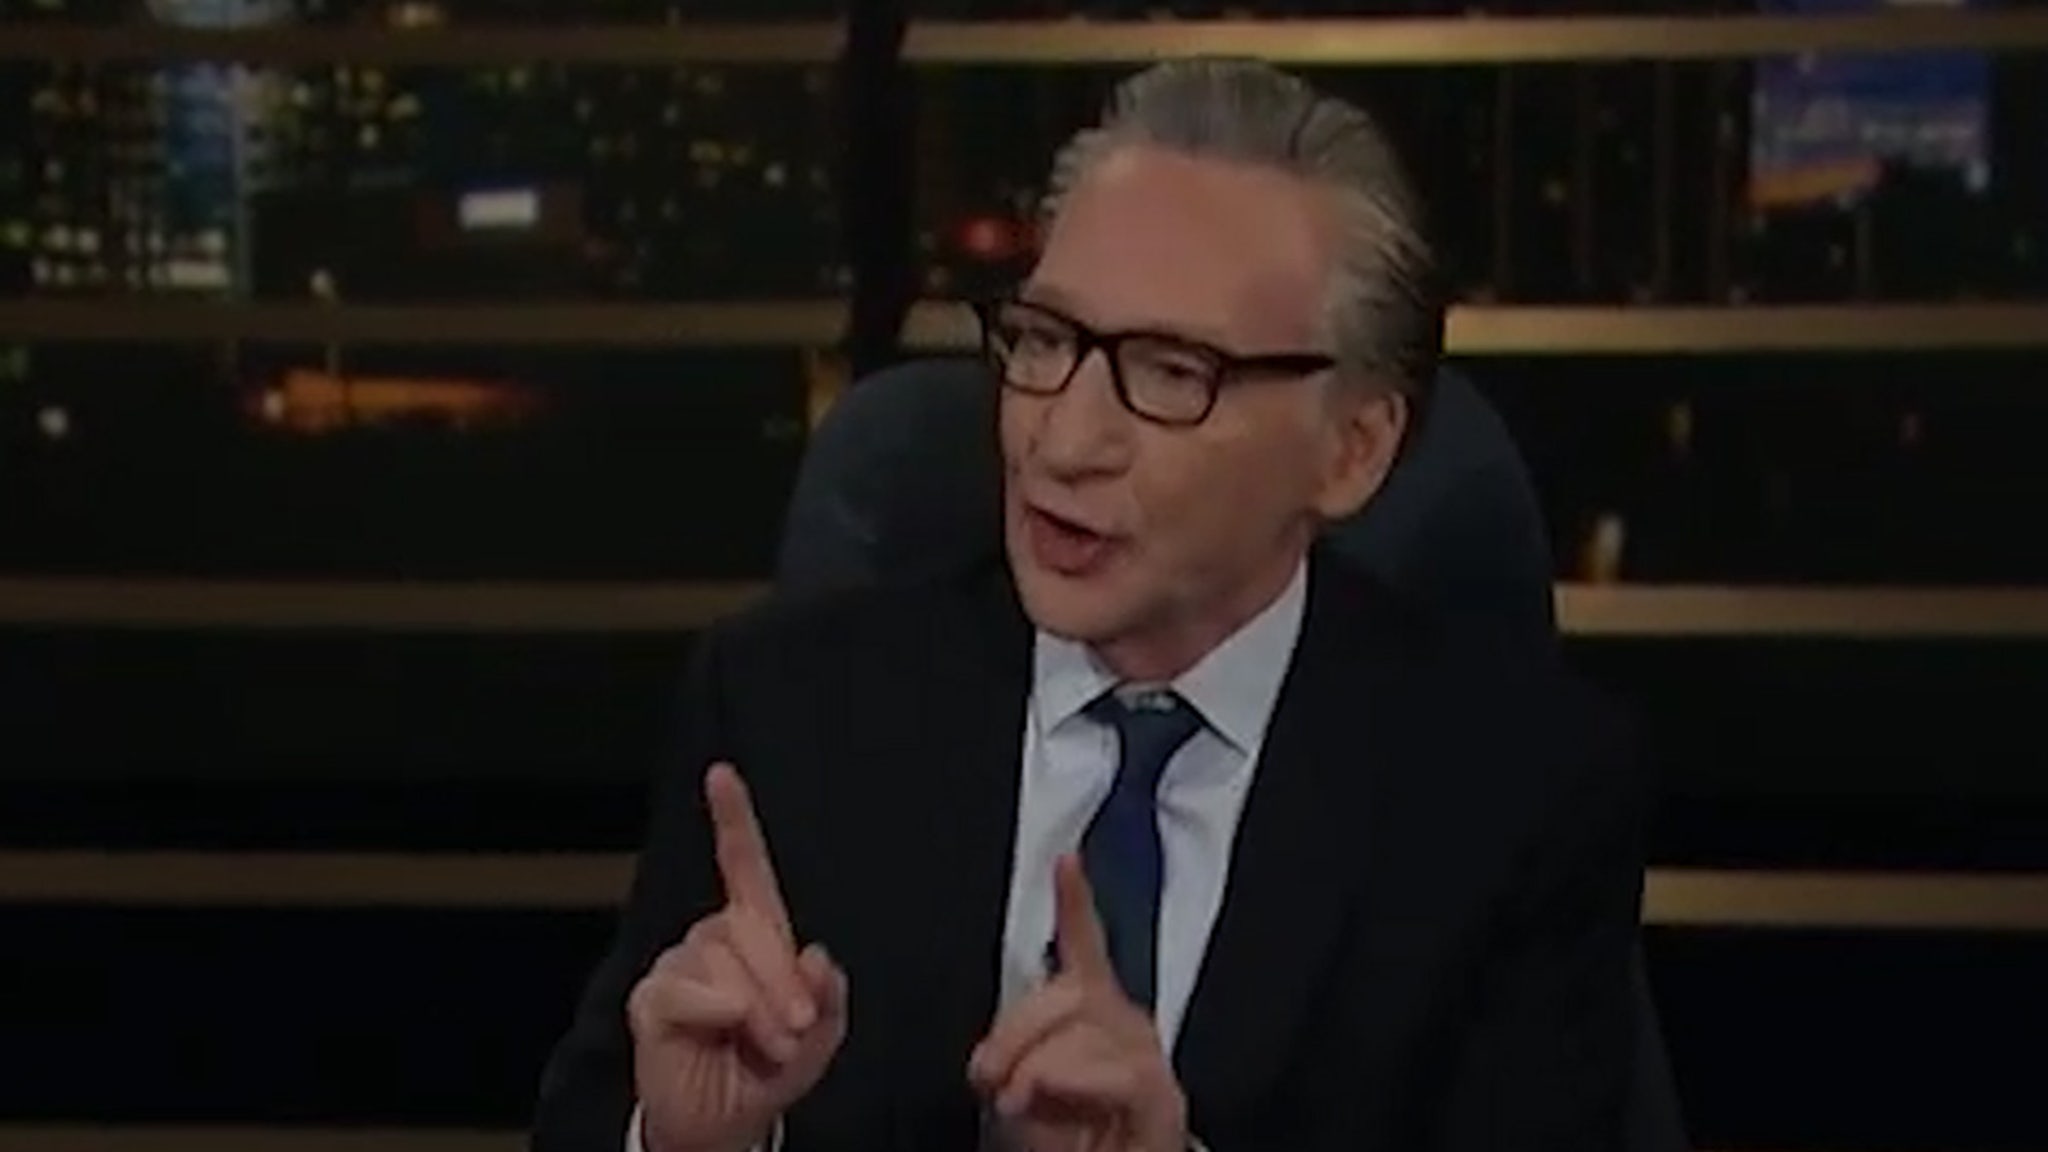 Bill Maher is Pro Elon Musk, Says Twitter Has Failed Over Censorship